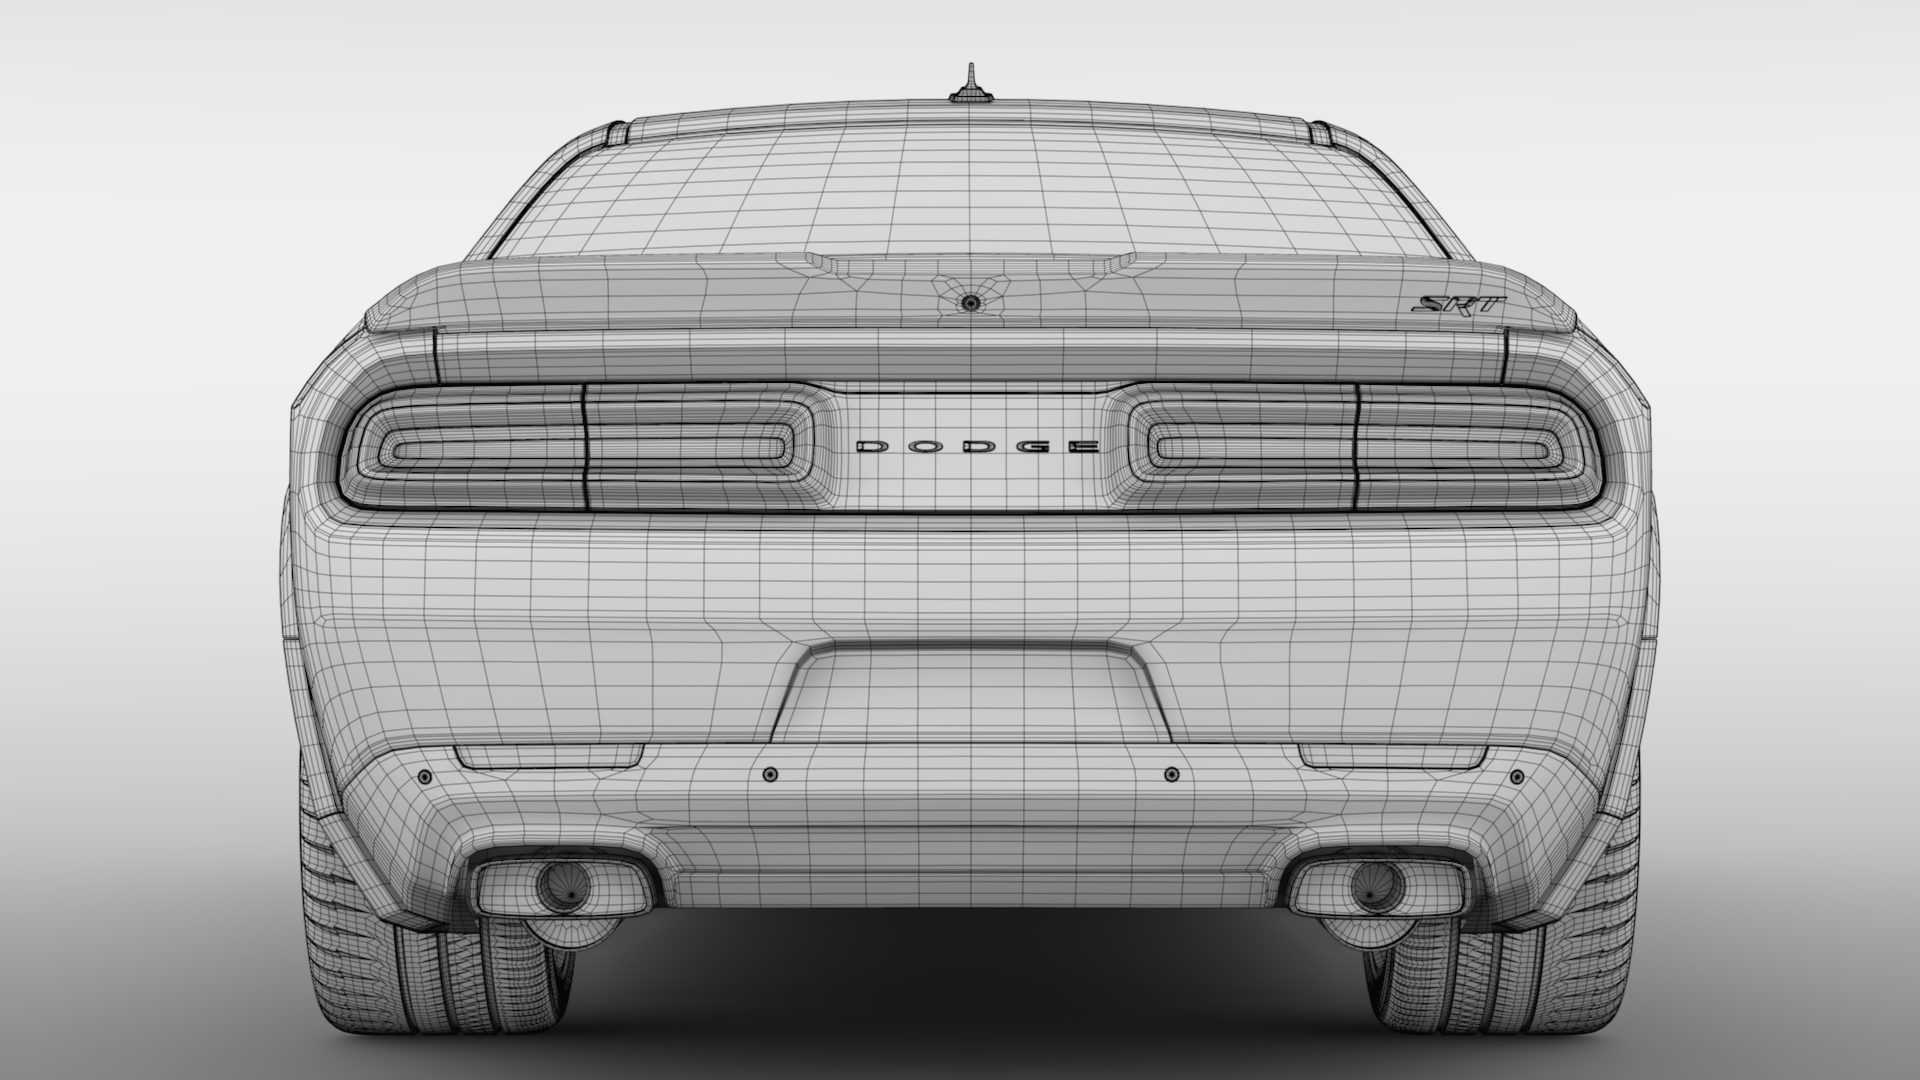 Dodge Challenger Sketch at Explore collection of